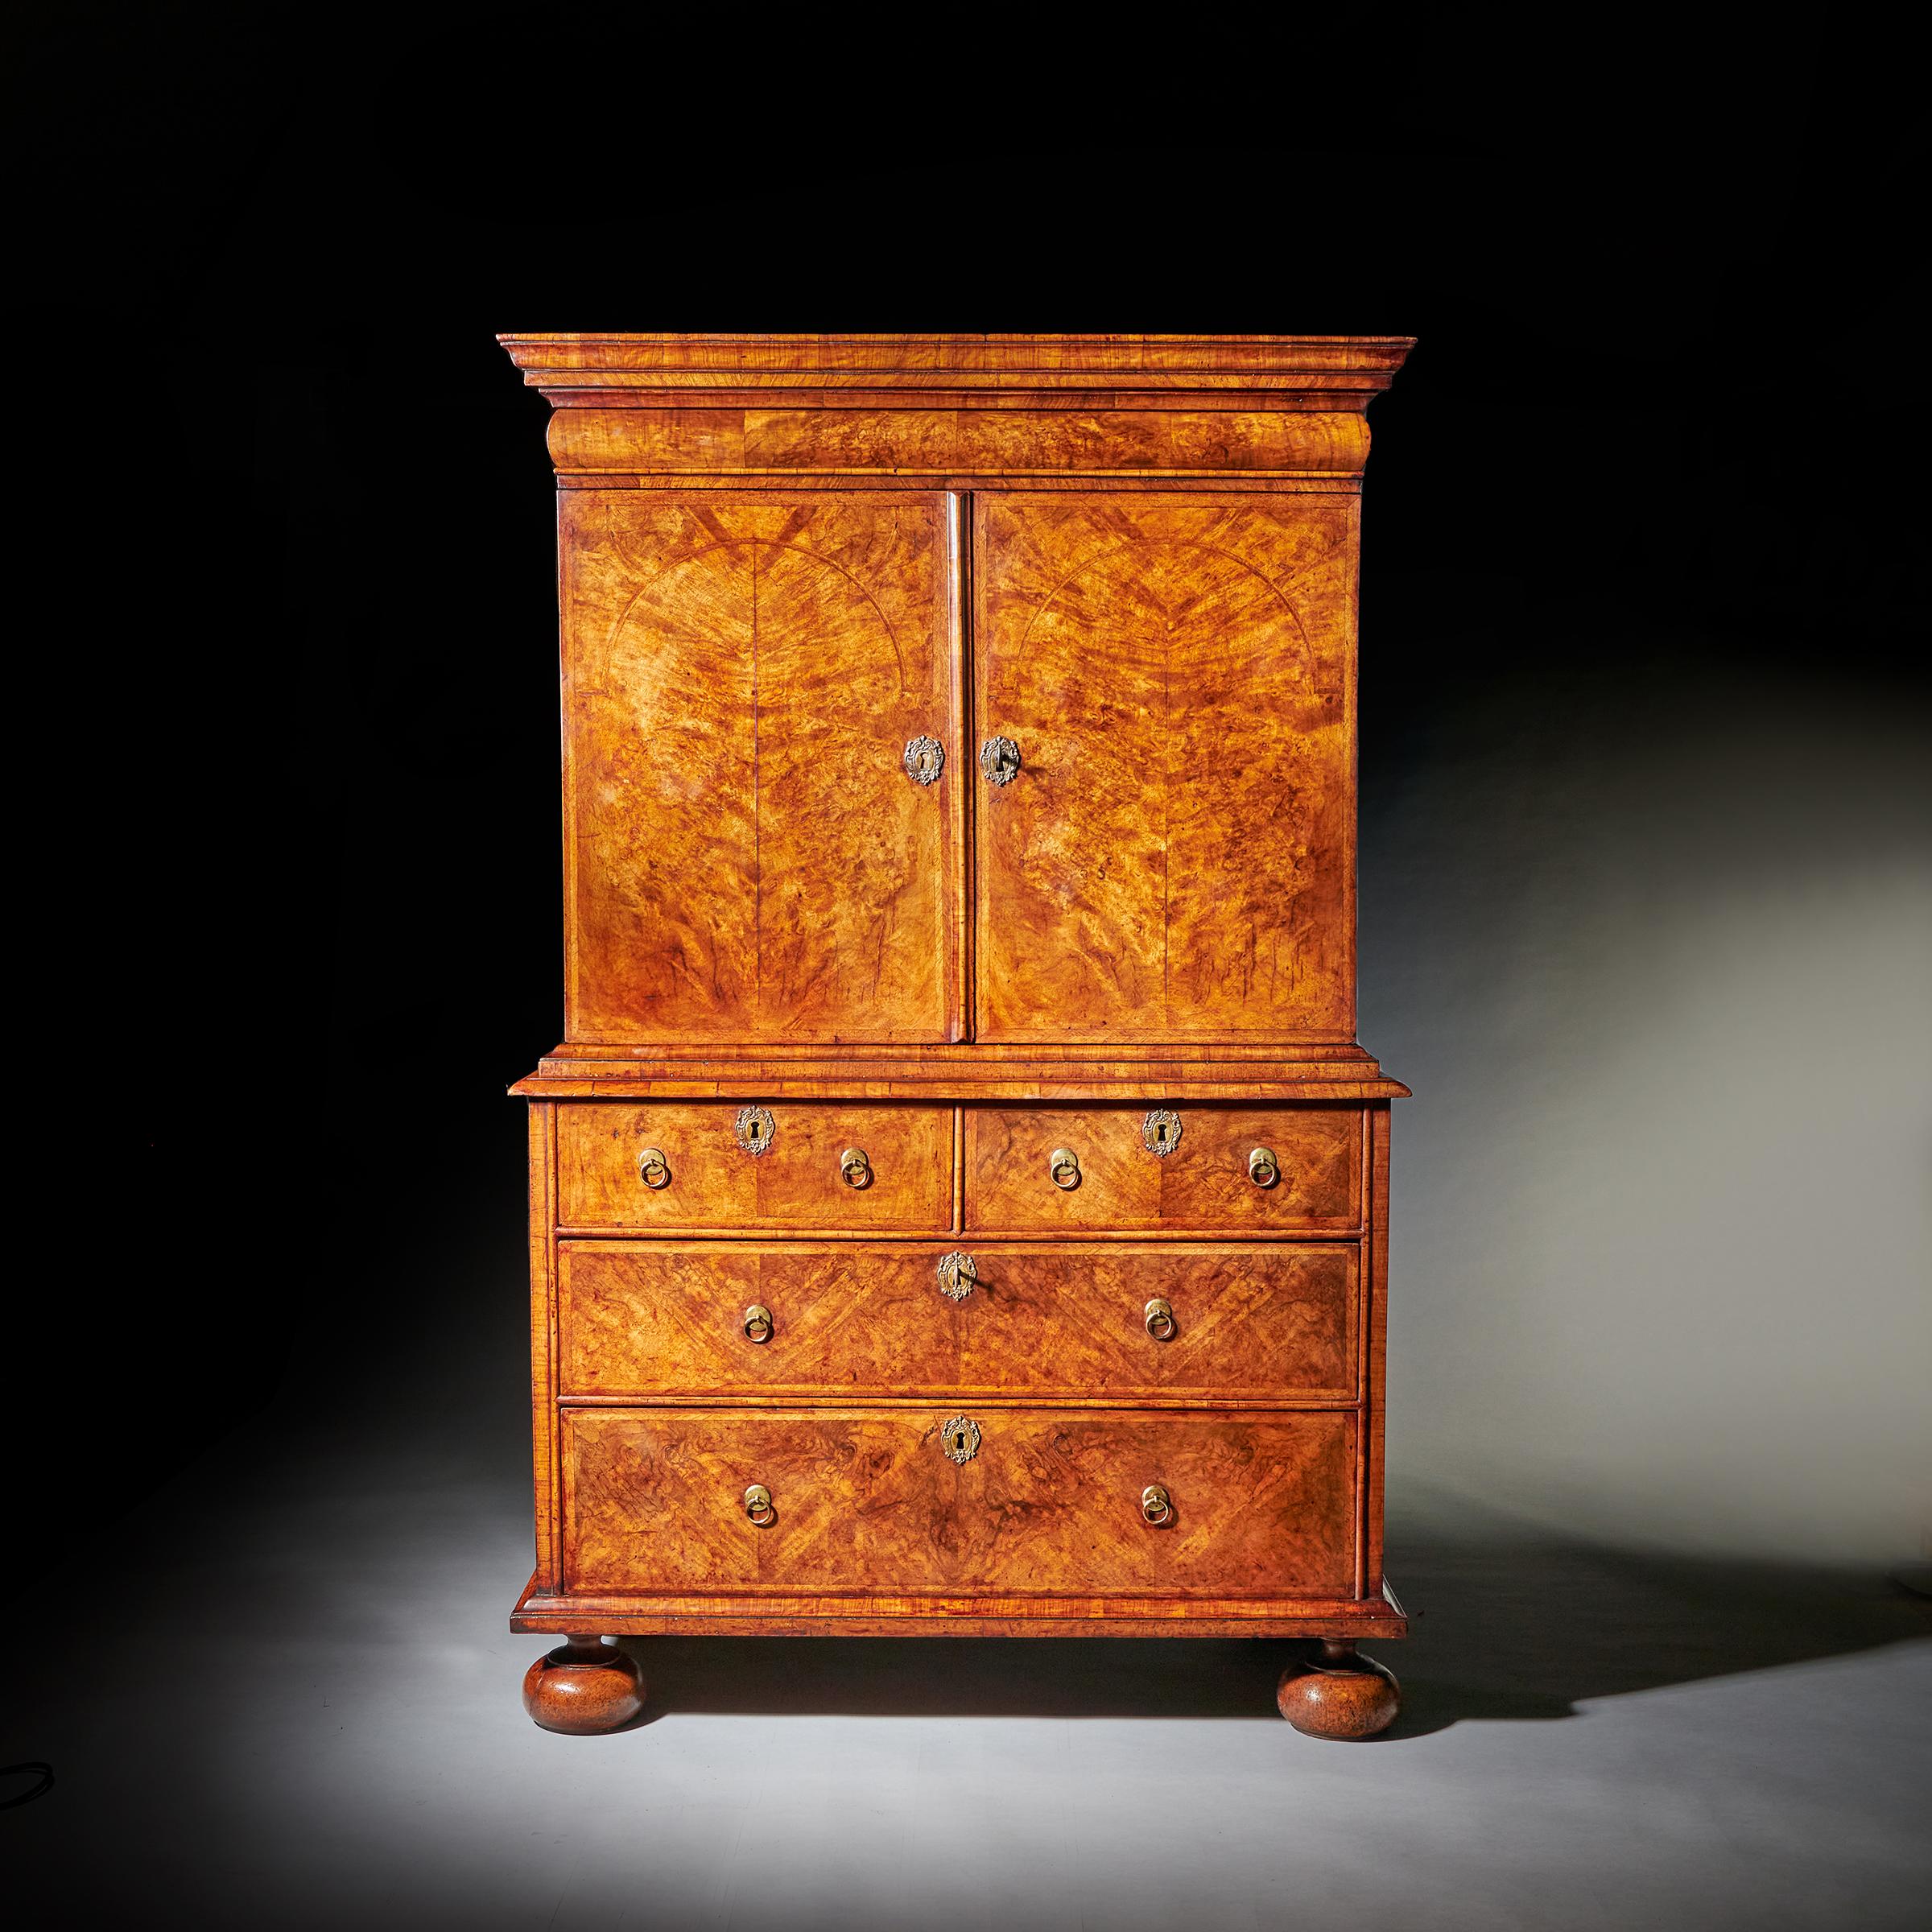 17th century William and Mary burr walnut cabinet on chest, circa 1690. England. Concealing two secret compartments. 

The Cabinet
The cross-grain cornice neatly conceals a full-length hidden drawer known as a cushion drawer and two concealed